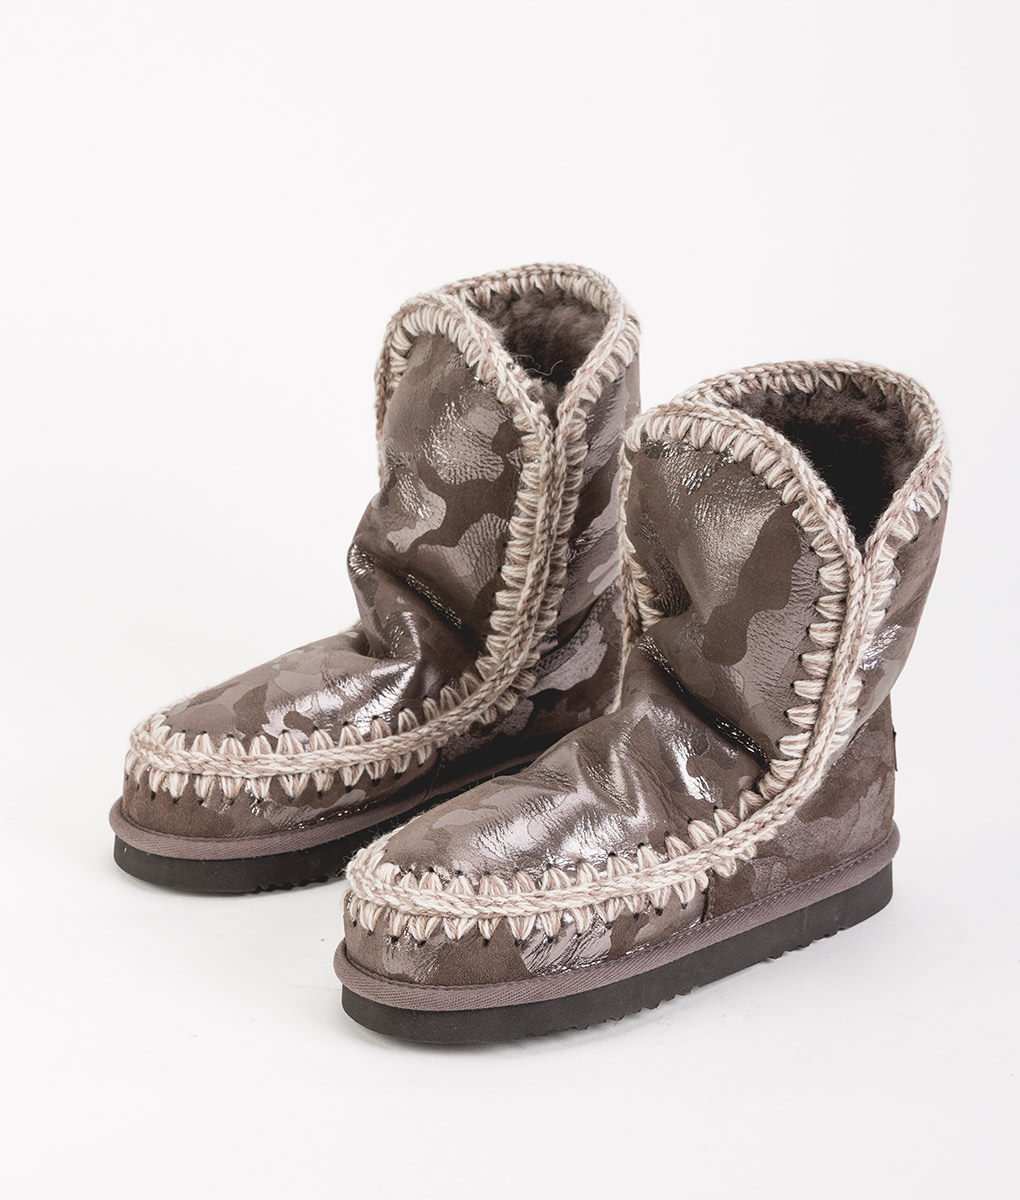 MOU Women Ankle Boots ESKIMO BOOT 24 LIMITED EDITION, Camel Silver 259.99